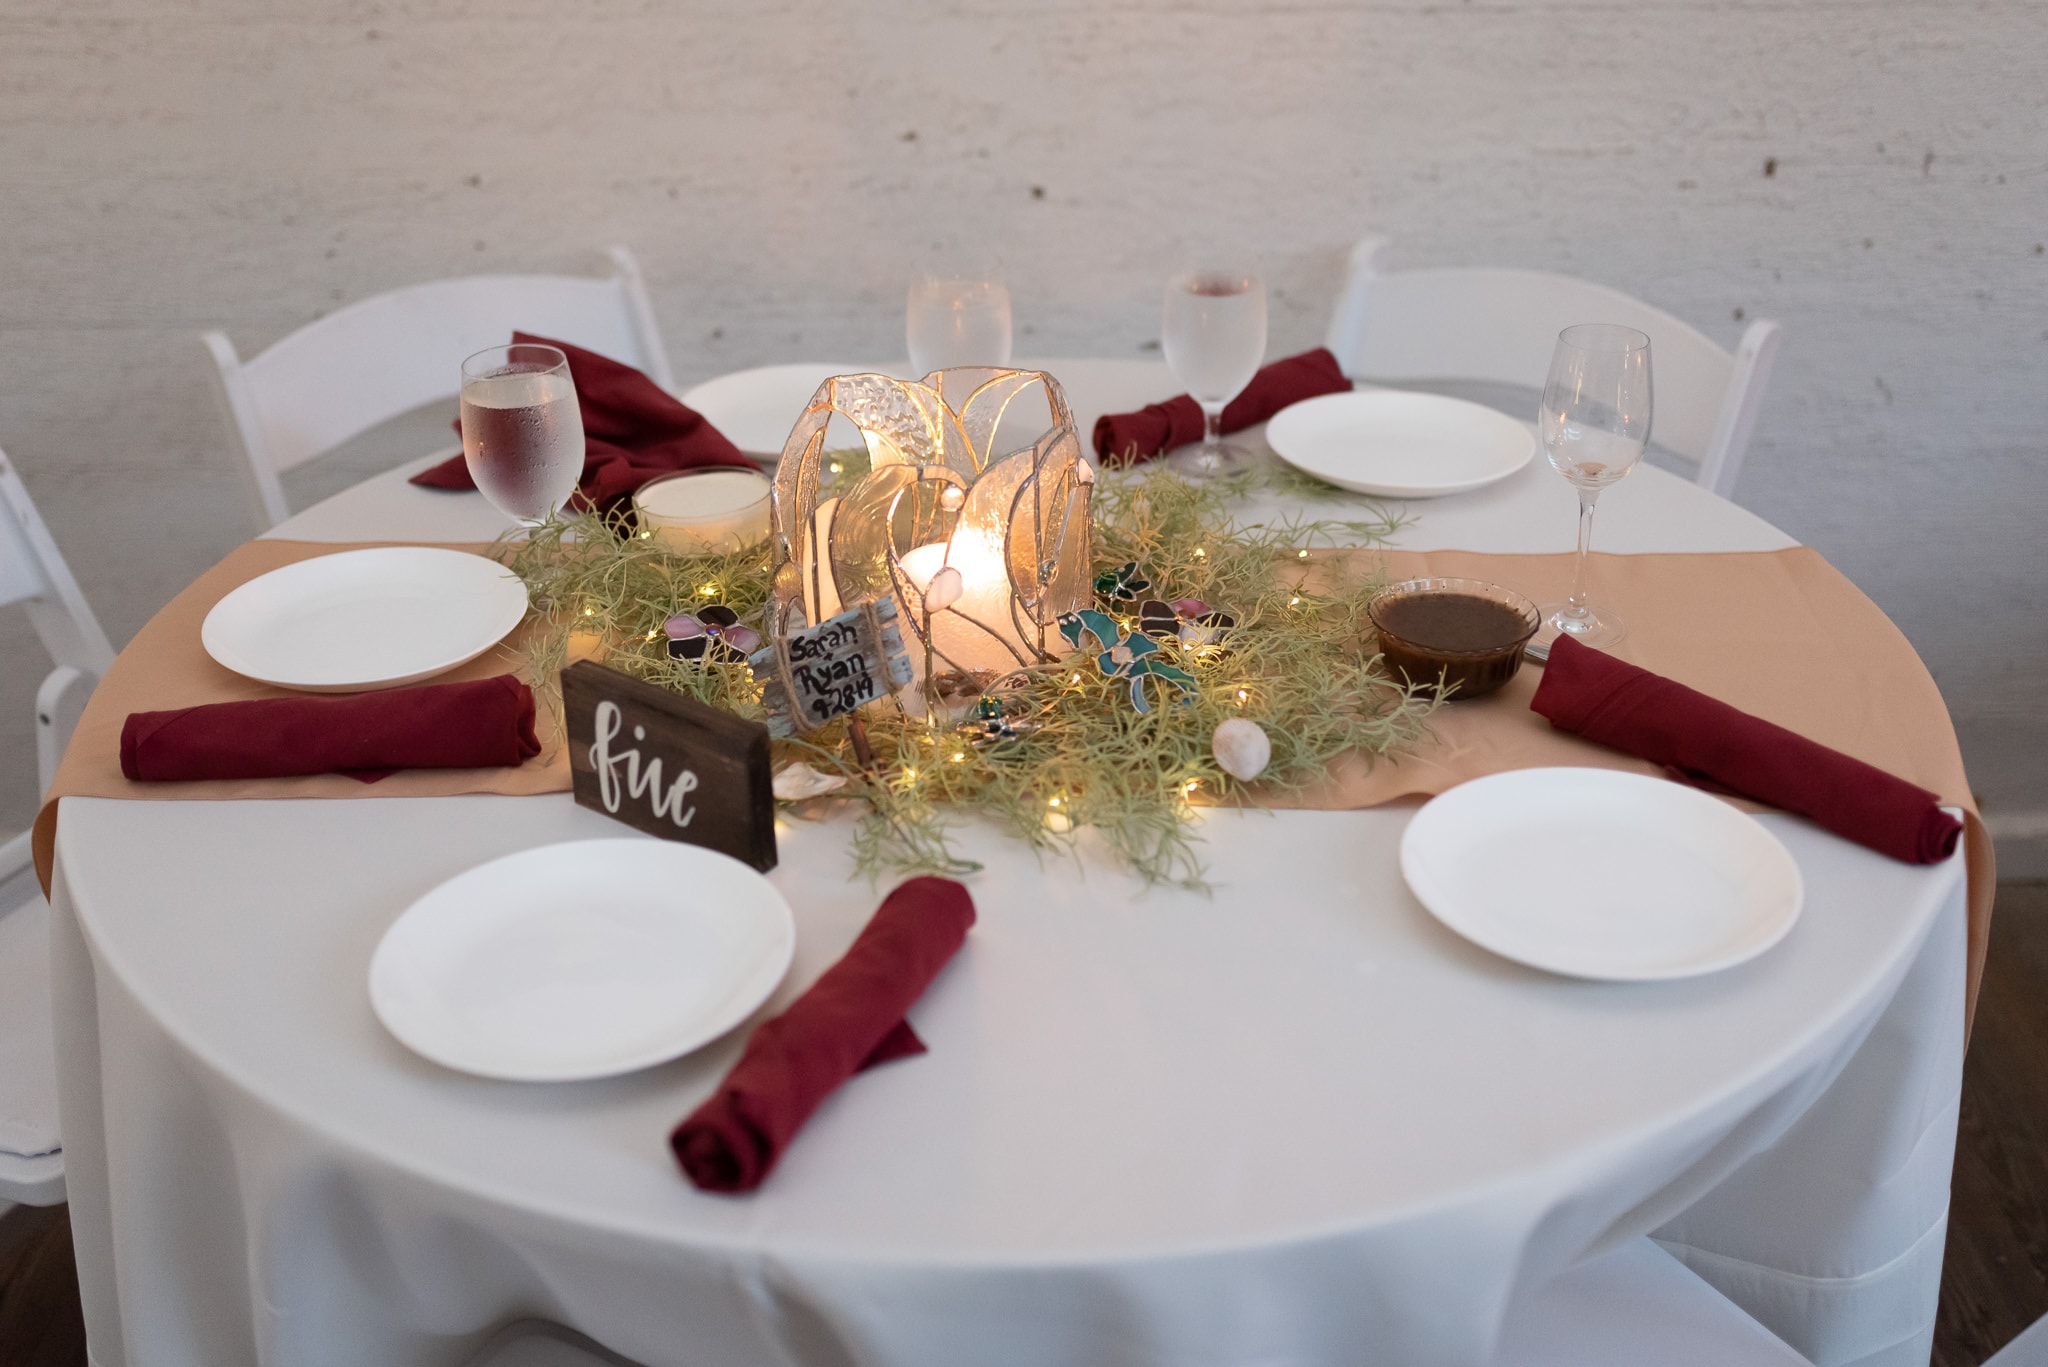 Table details after lit candles - Pelican Inn - Pawleys Island